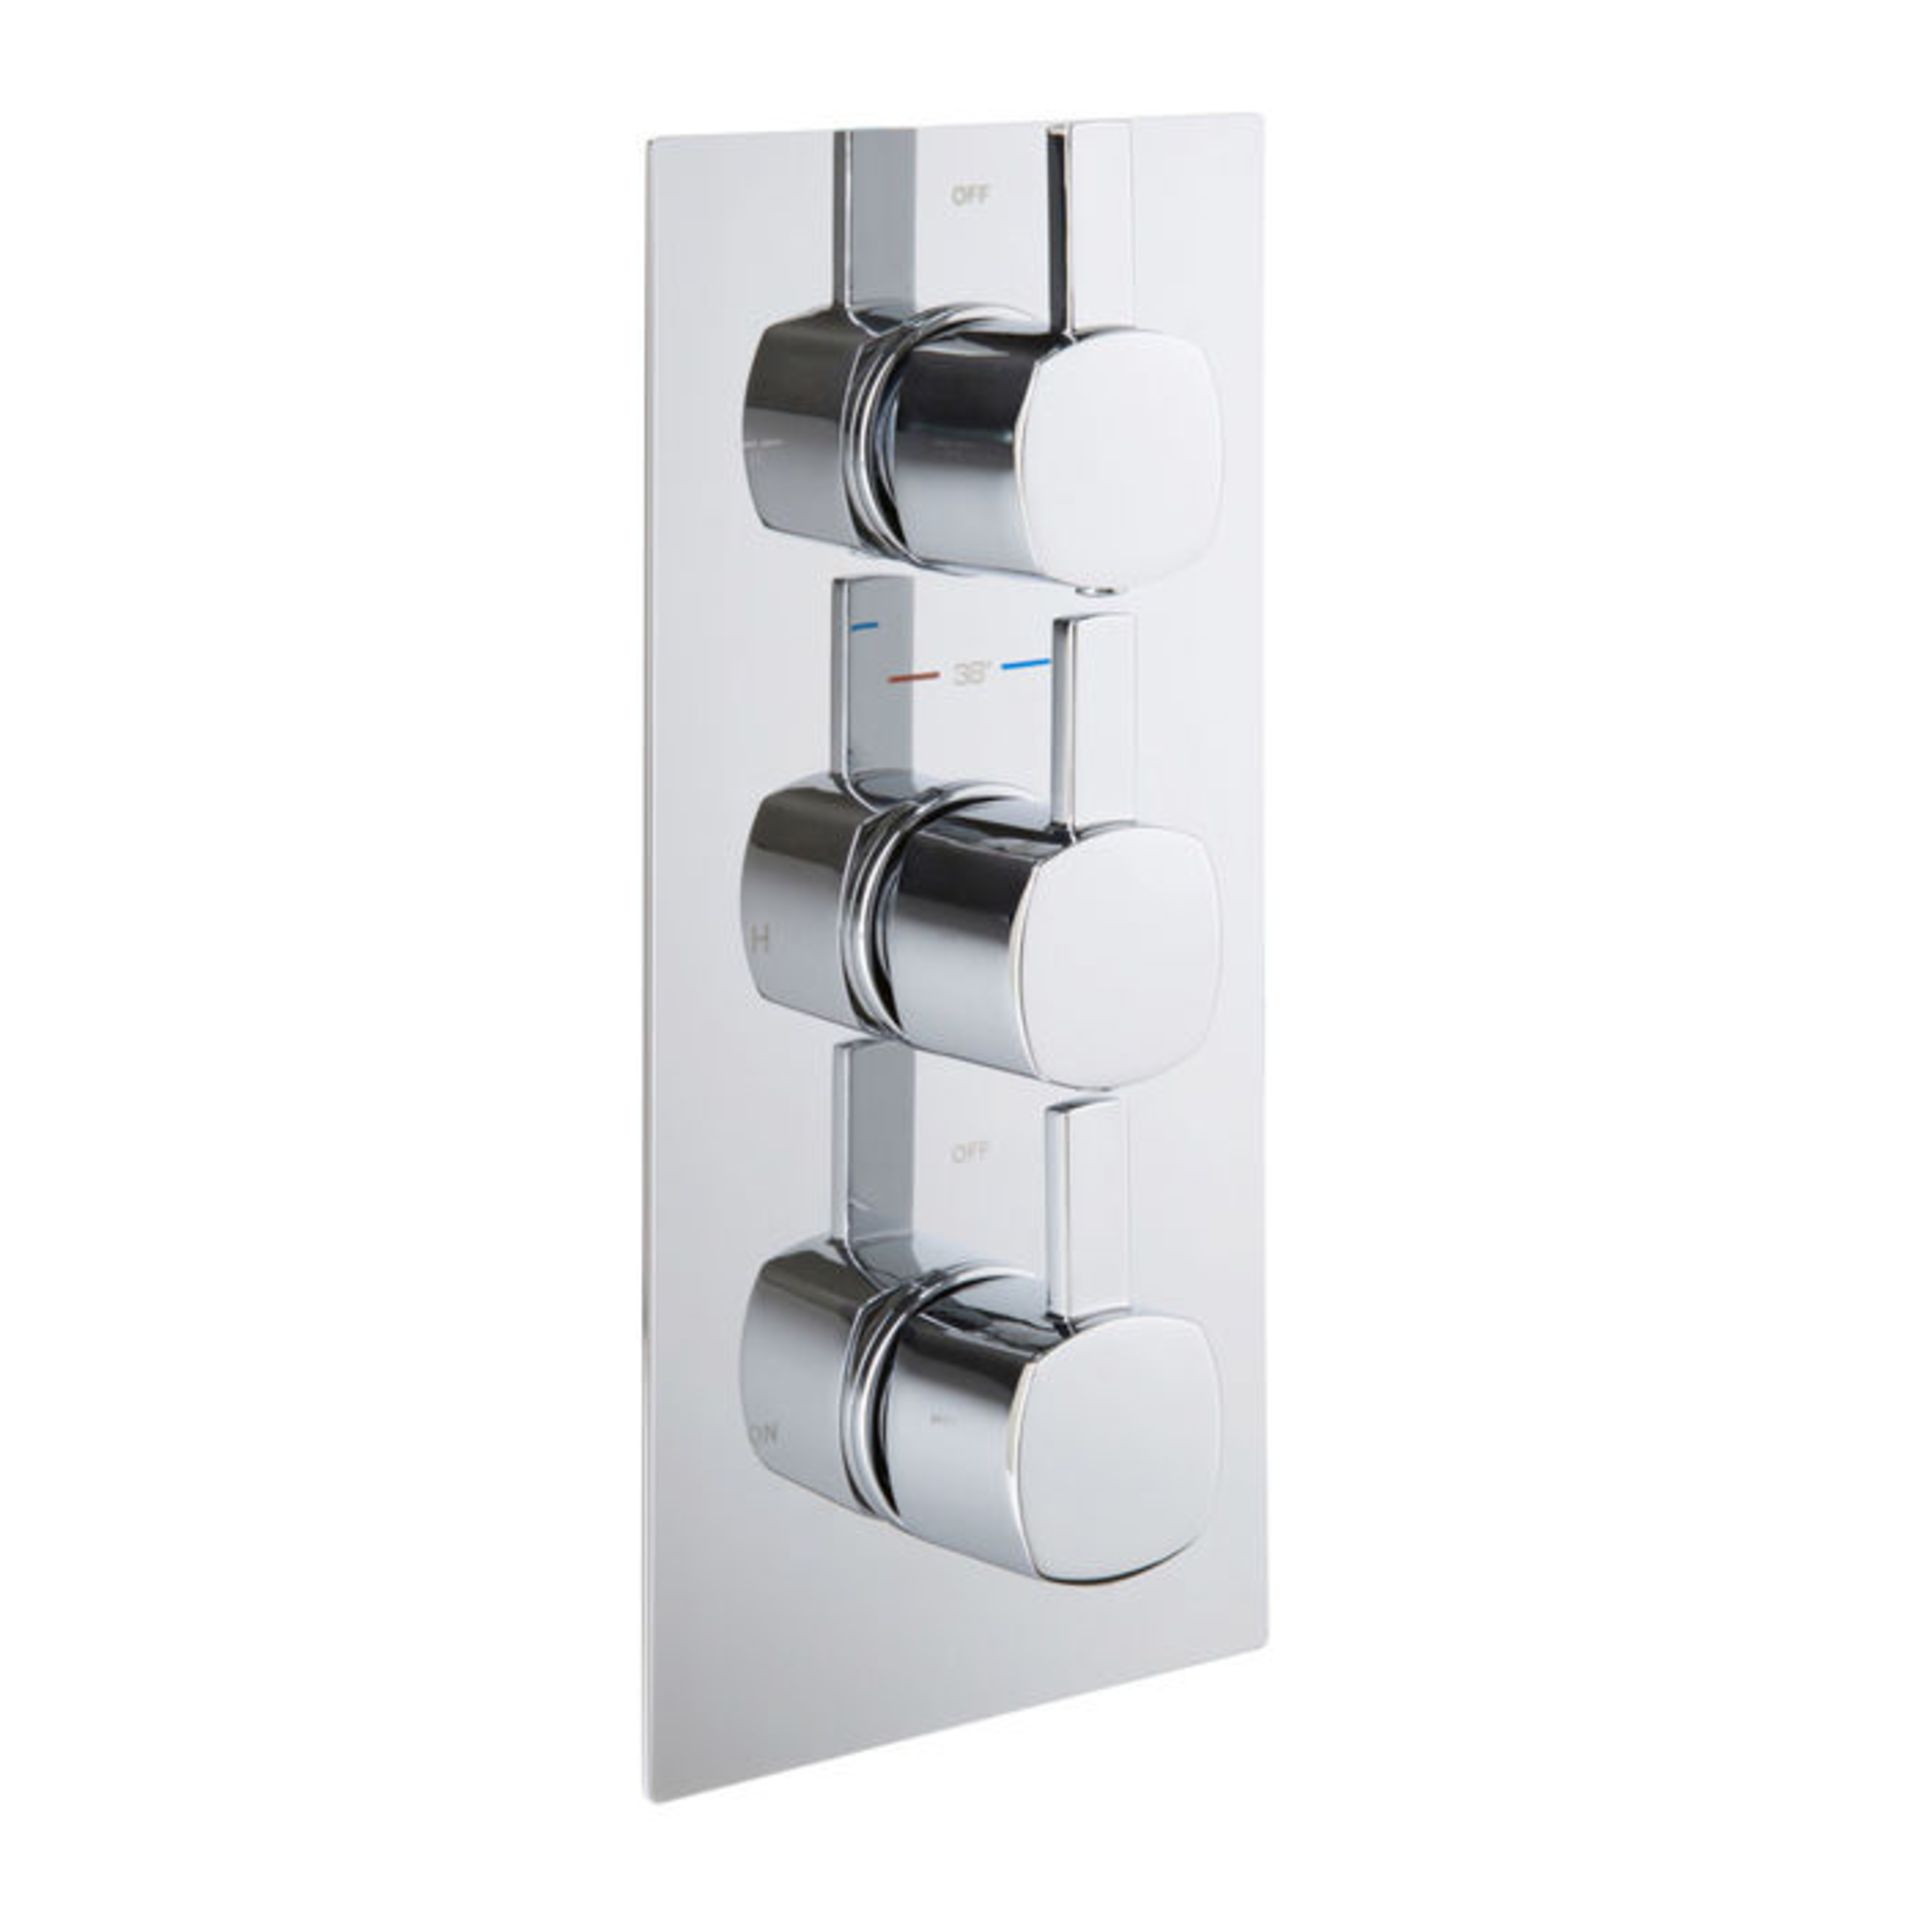 (HS67) Square Three Way Concealed Valve. RRP £349.99. Chrome plated solid brass Built in anti-